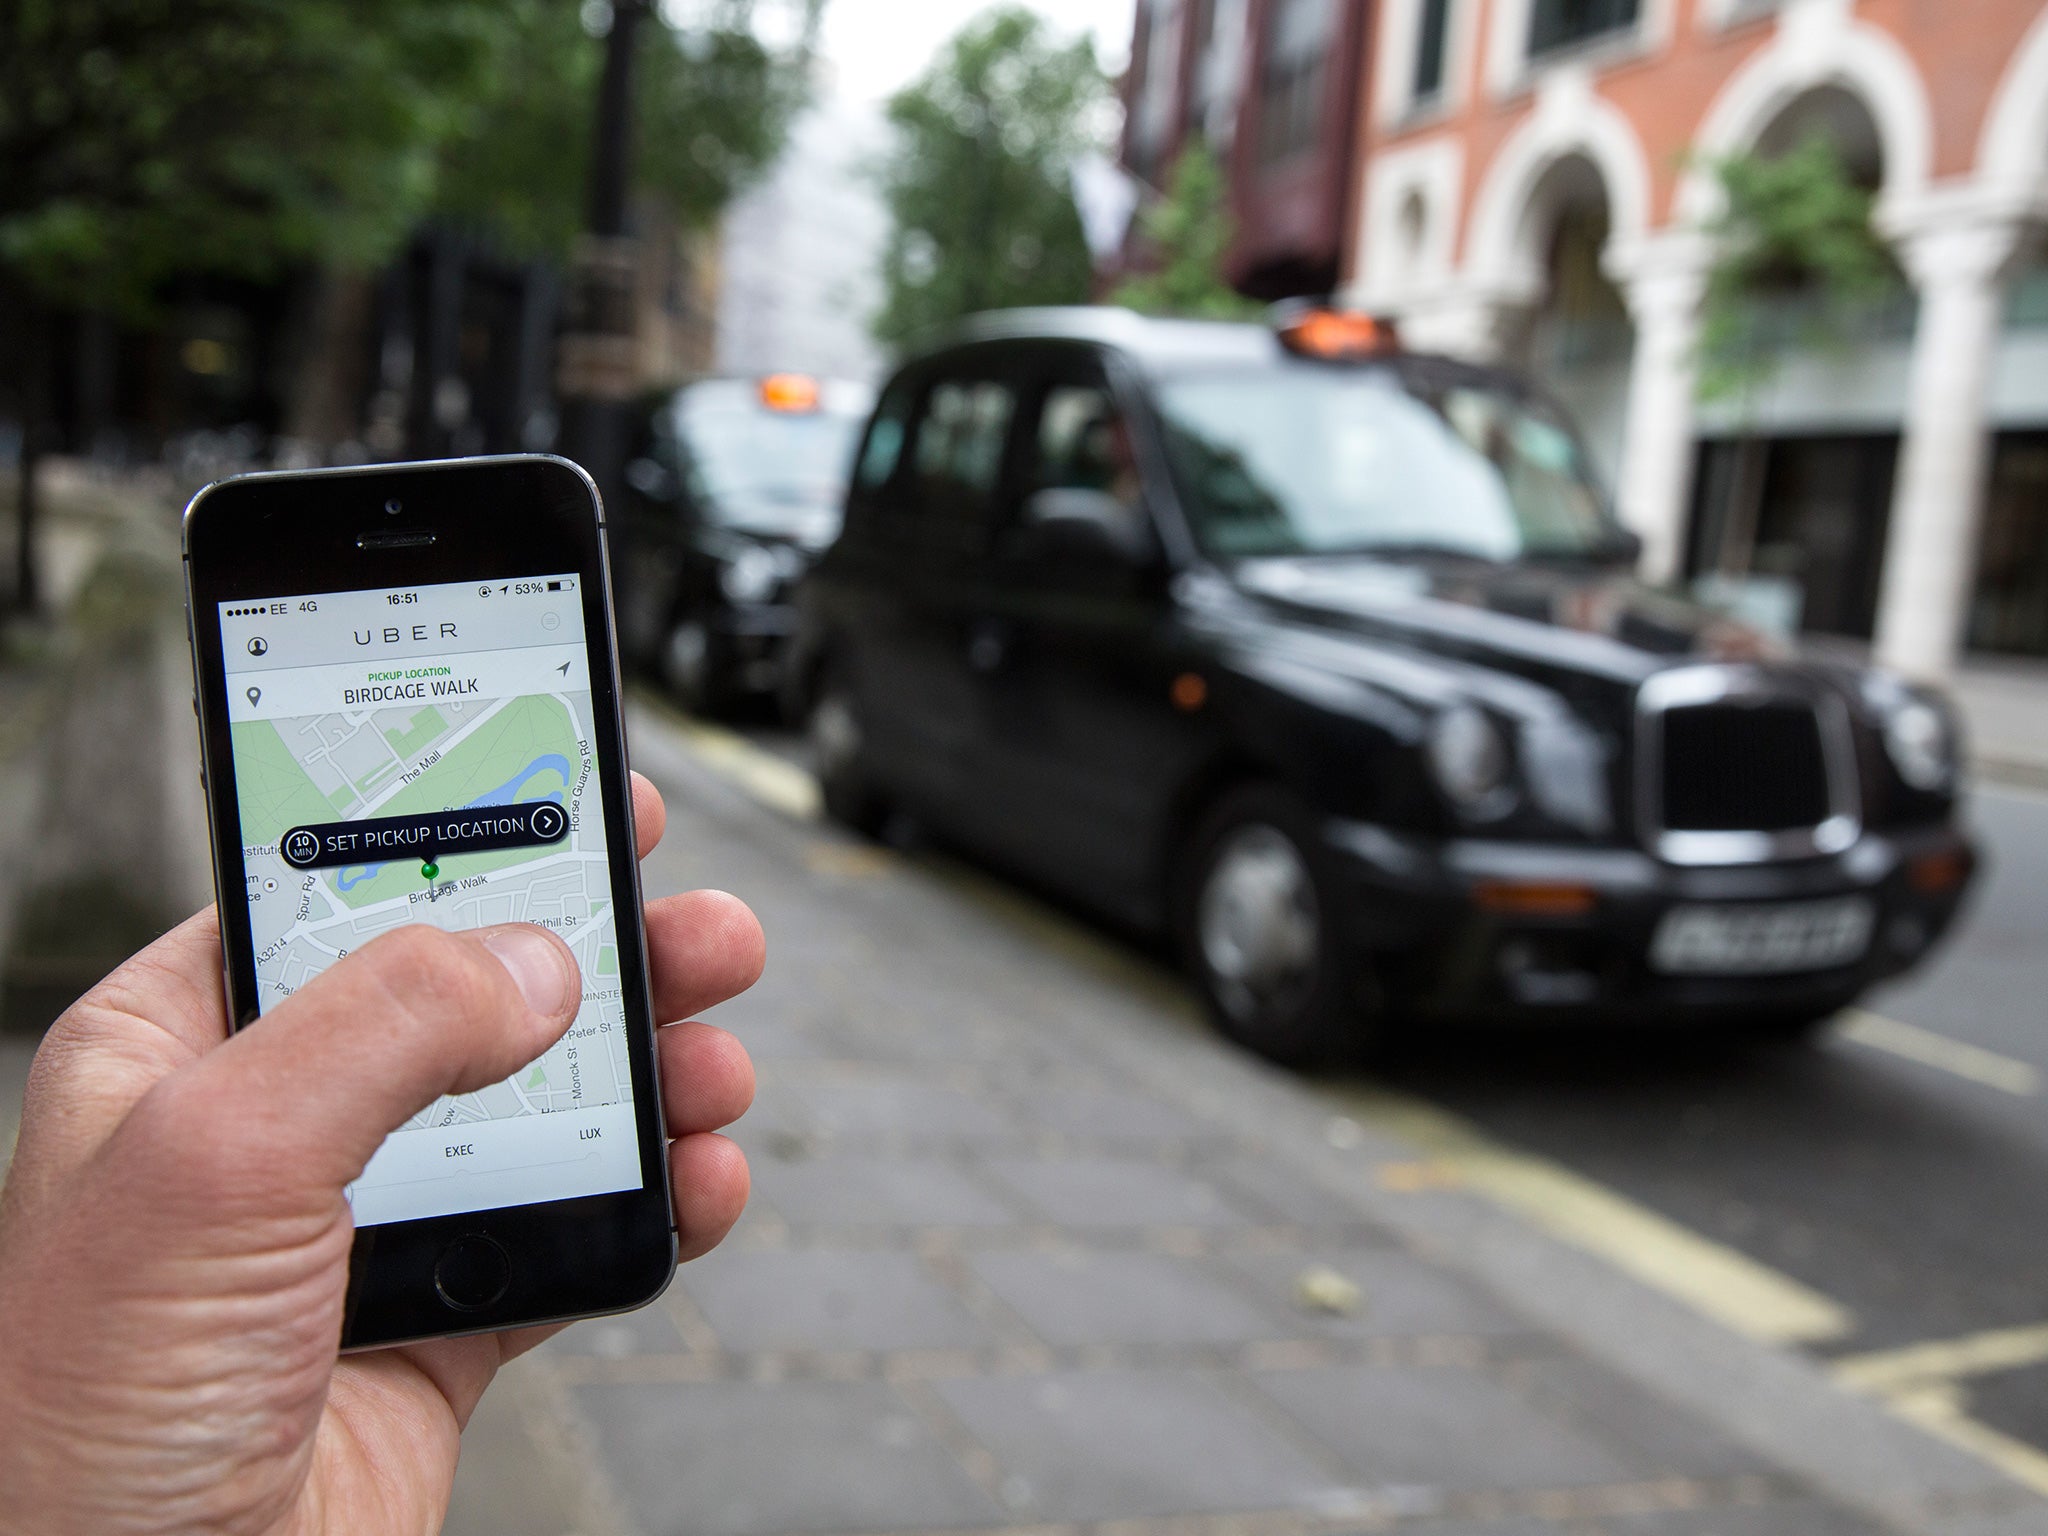 TfL will continue to look into the way that Uber drivers and taxis operate